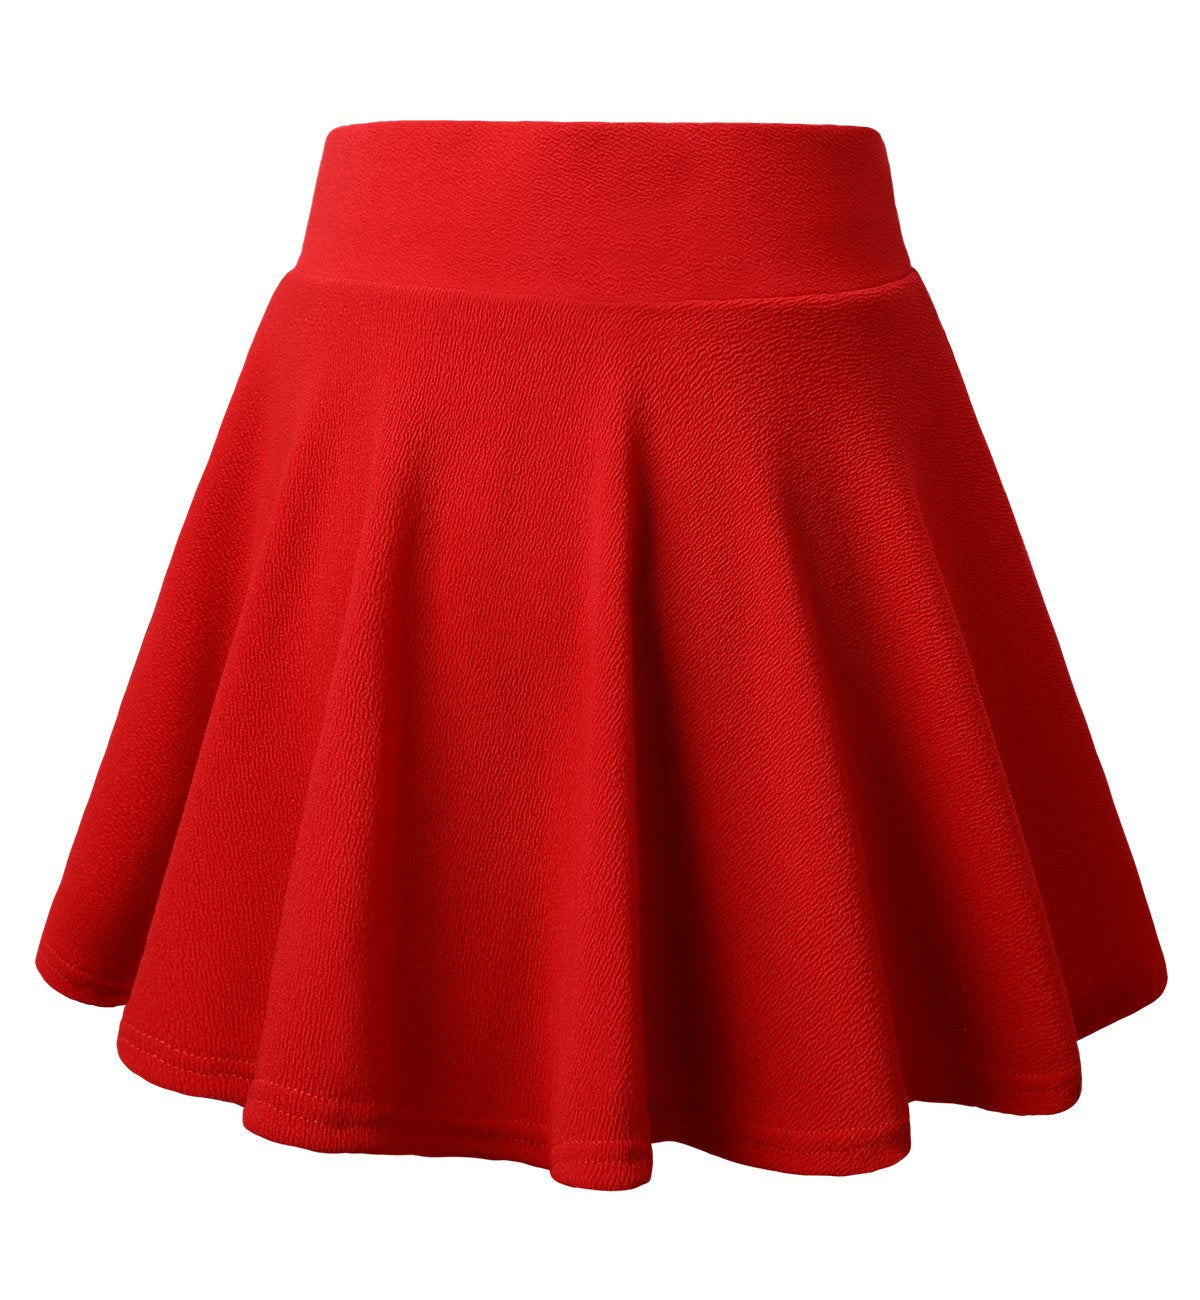 DJT Flared Pleated Red Women's Casual Stretchy Mini Skater Skirt with Shorts